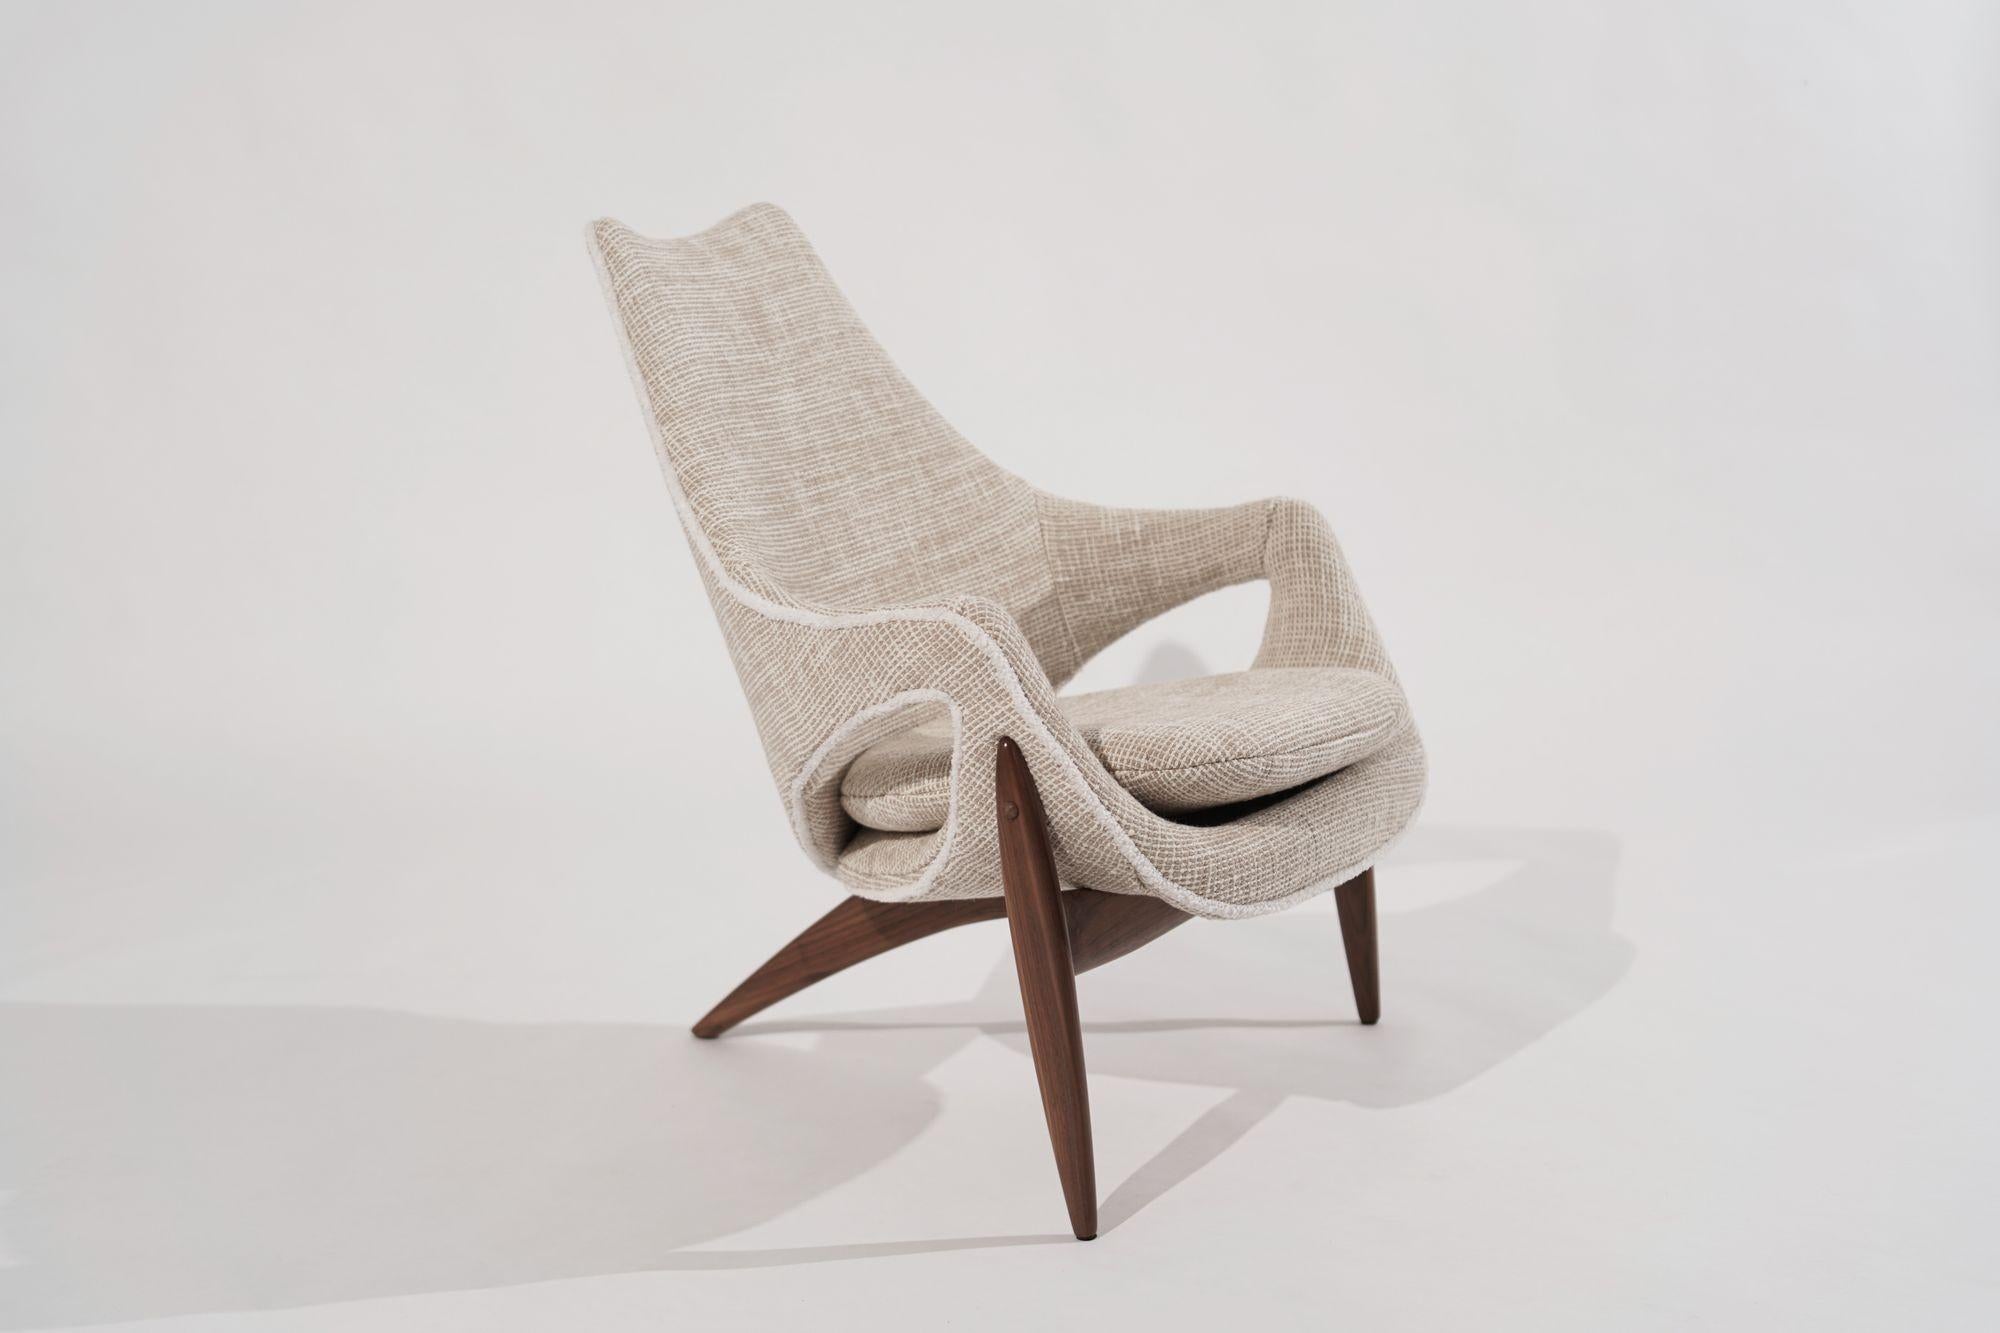 Luigi Tiengo 1950s Sculptural Walnut Lounge Chair, a true vintage gem meticulously restored by Stamford Modern. 
Designed by Luigi Tiengo for Cimon in Montreal, Canada, this lounge chair is a tribute to mid-century modern design. Its sculptural